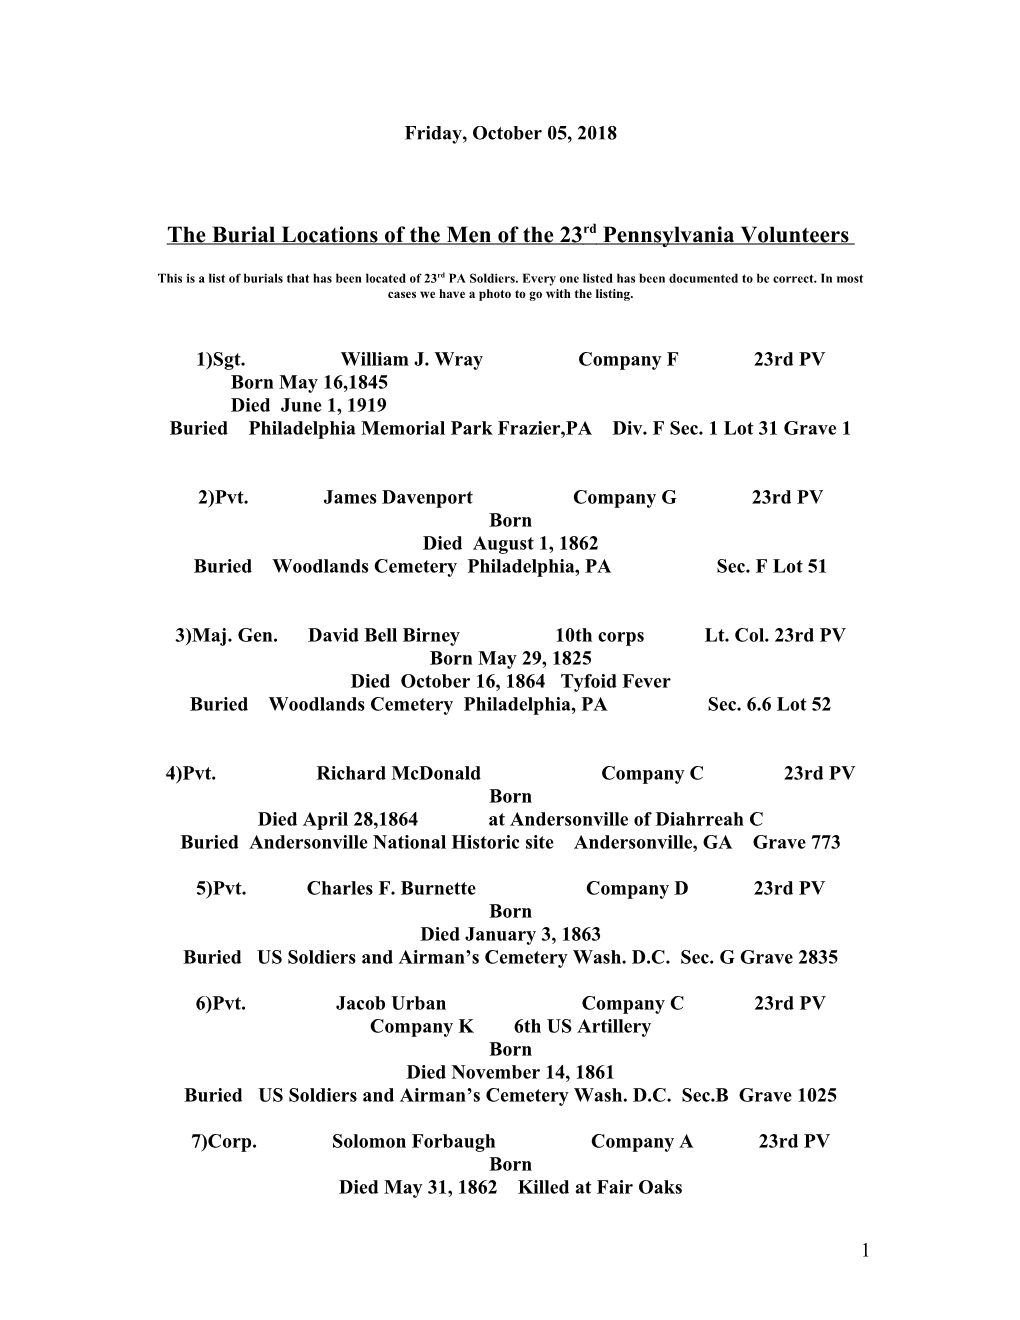 The Burial Locations of the Men of the 23Rdpennsylvania Volunteers